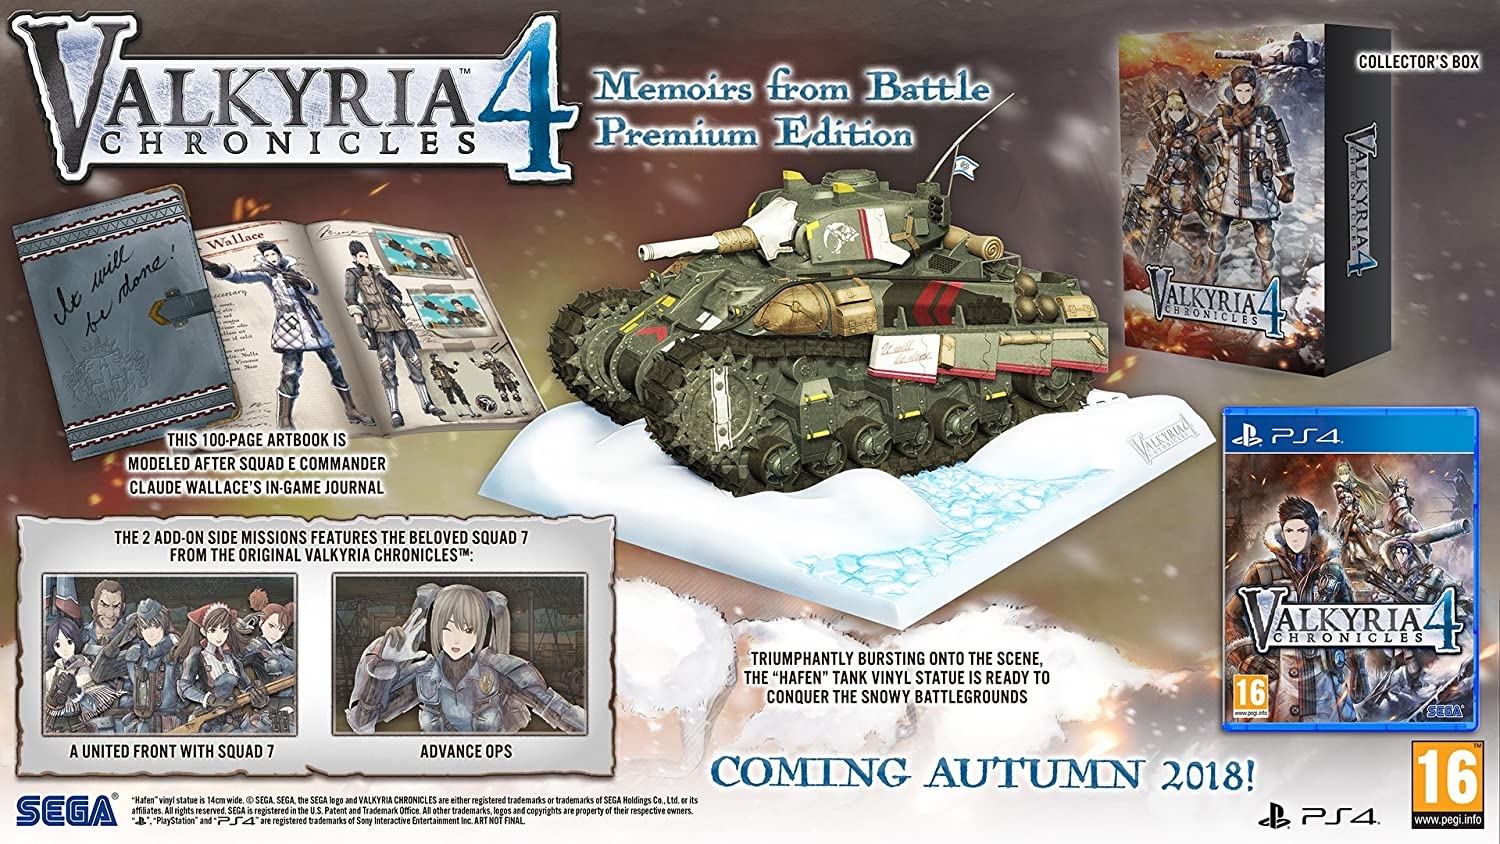 Valkyria Chronicles 4: Memoirs from Battle Premium Edition (Nintendo Switch)